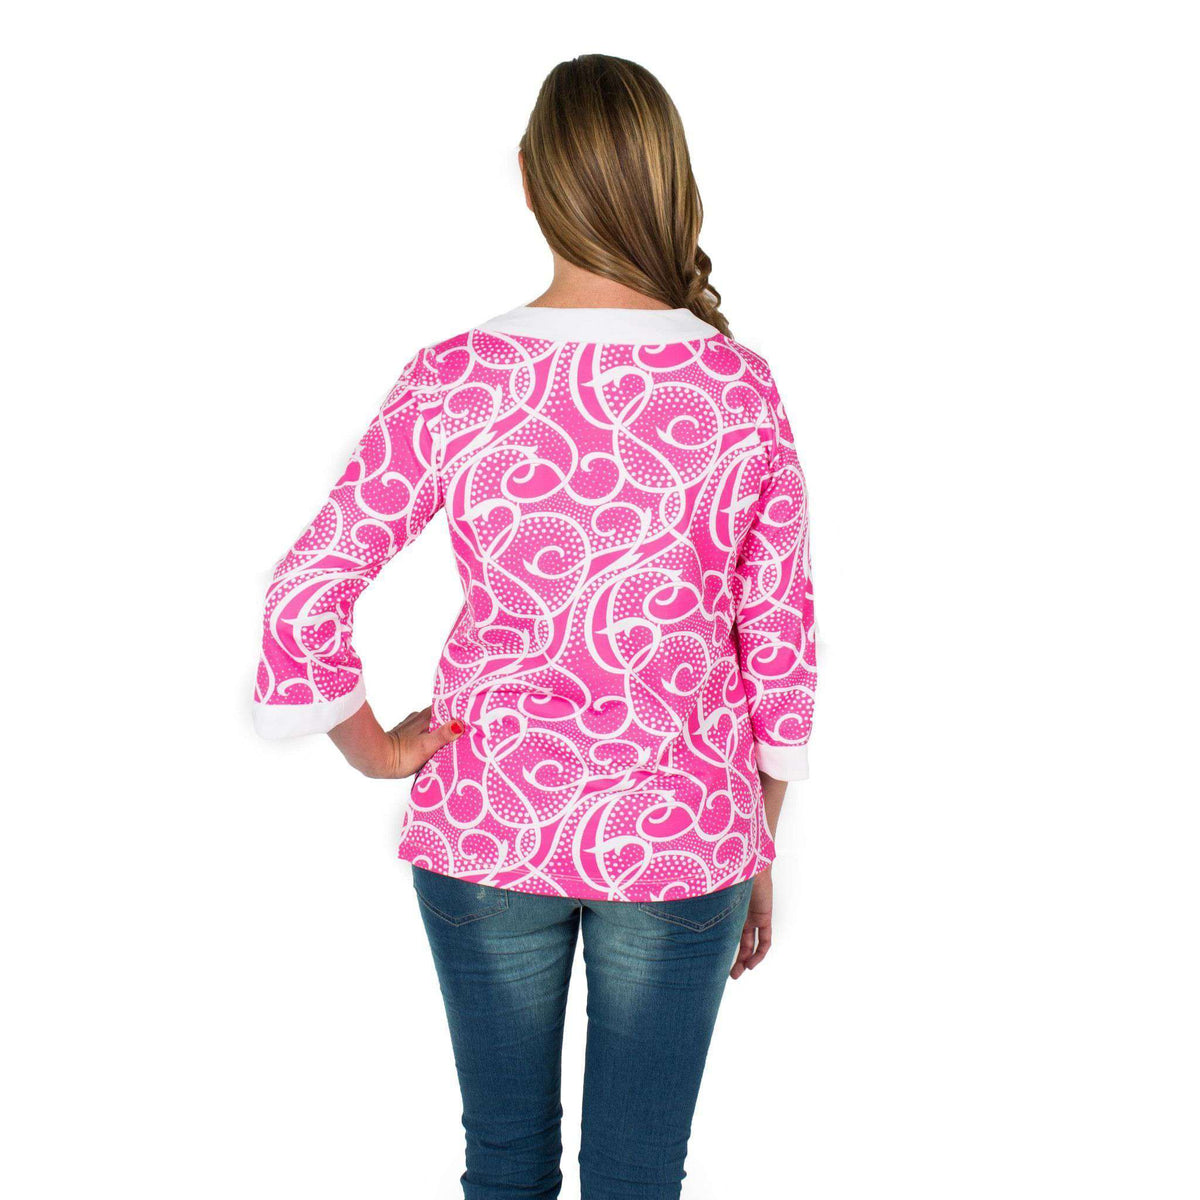 Chatham Tunic in Keely Pink by Melly M - Country Club Prep